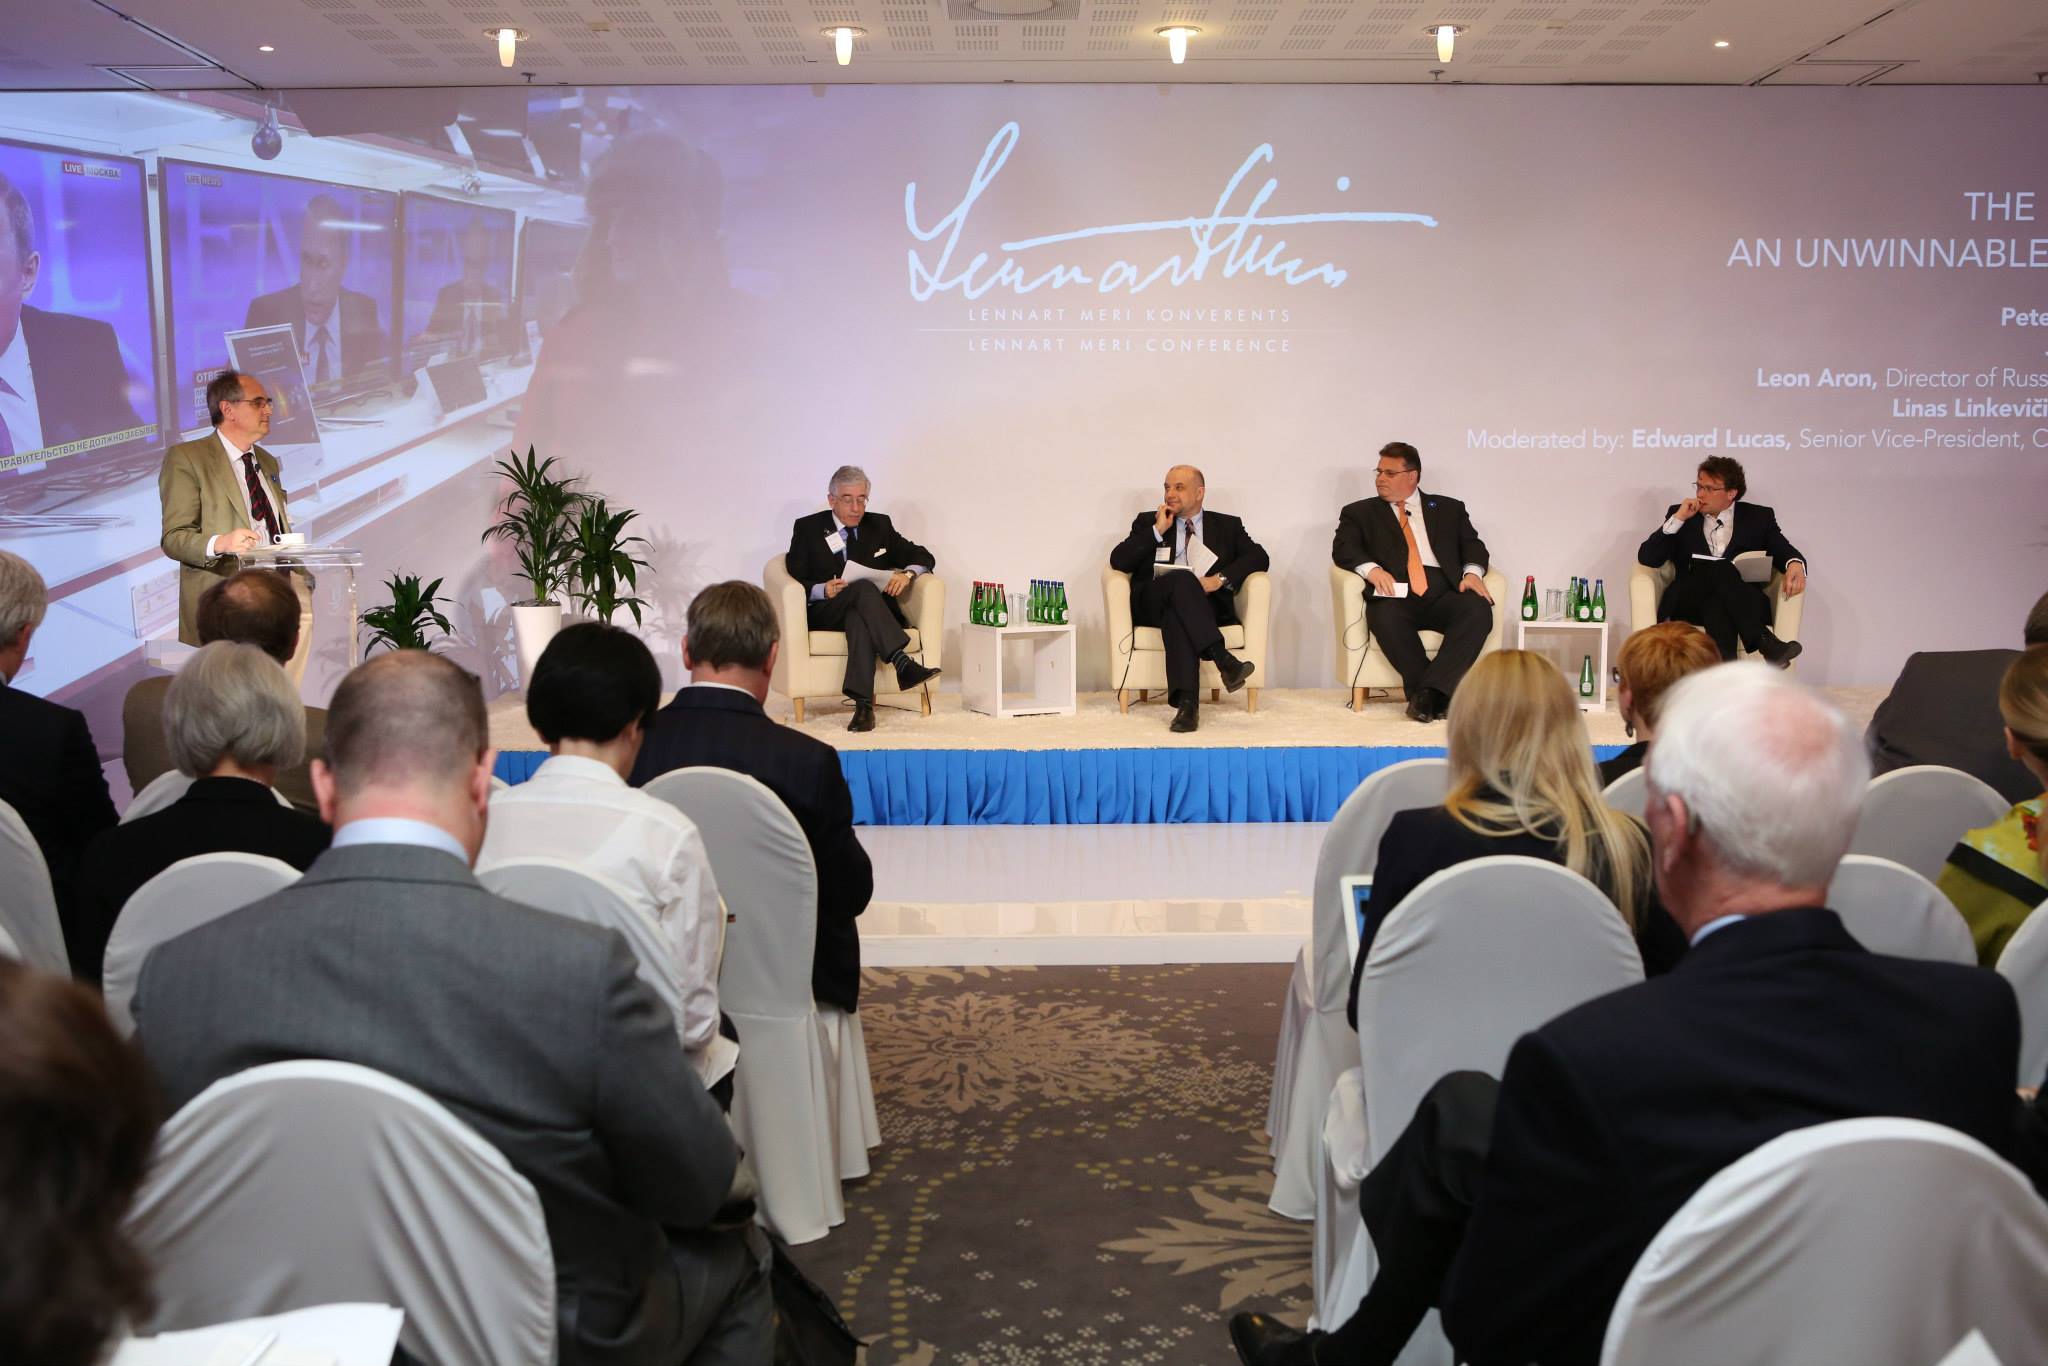 Lennart Meri Conference set to discuss future of Europe and NATO ahead of the Warsaw summit